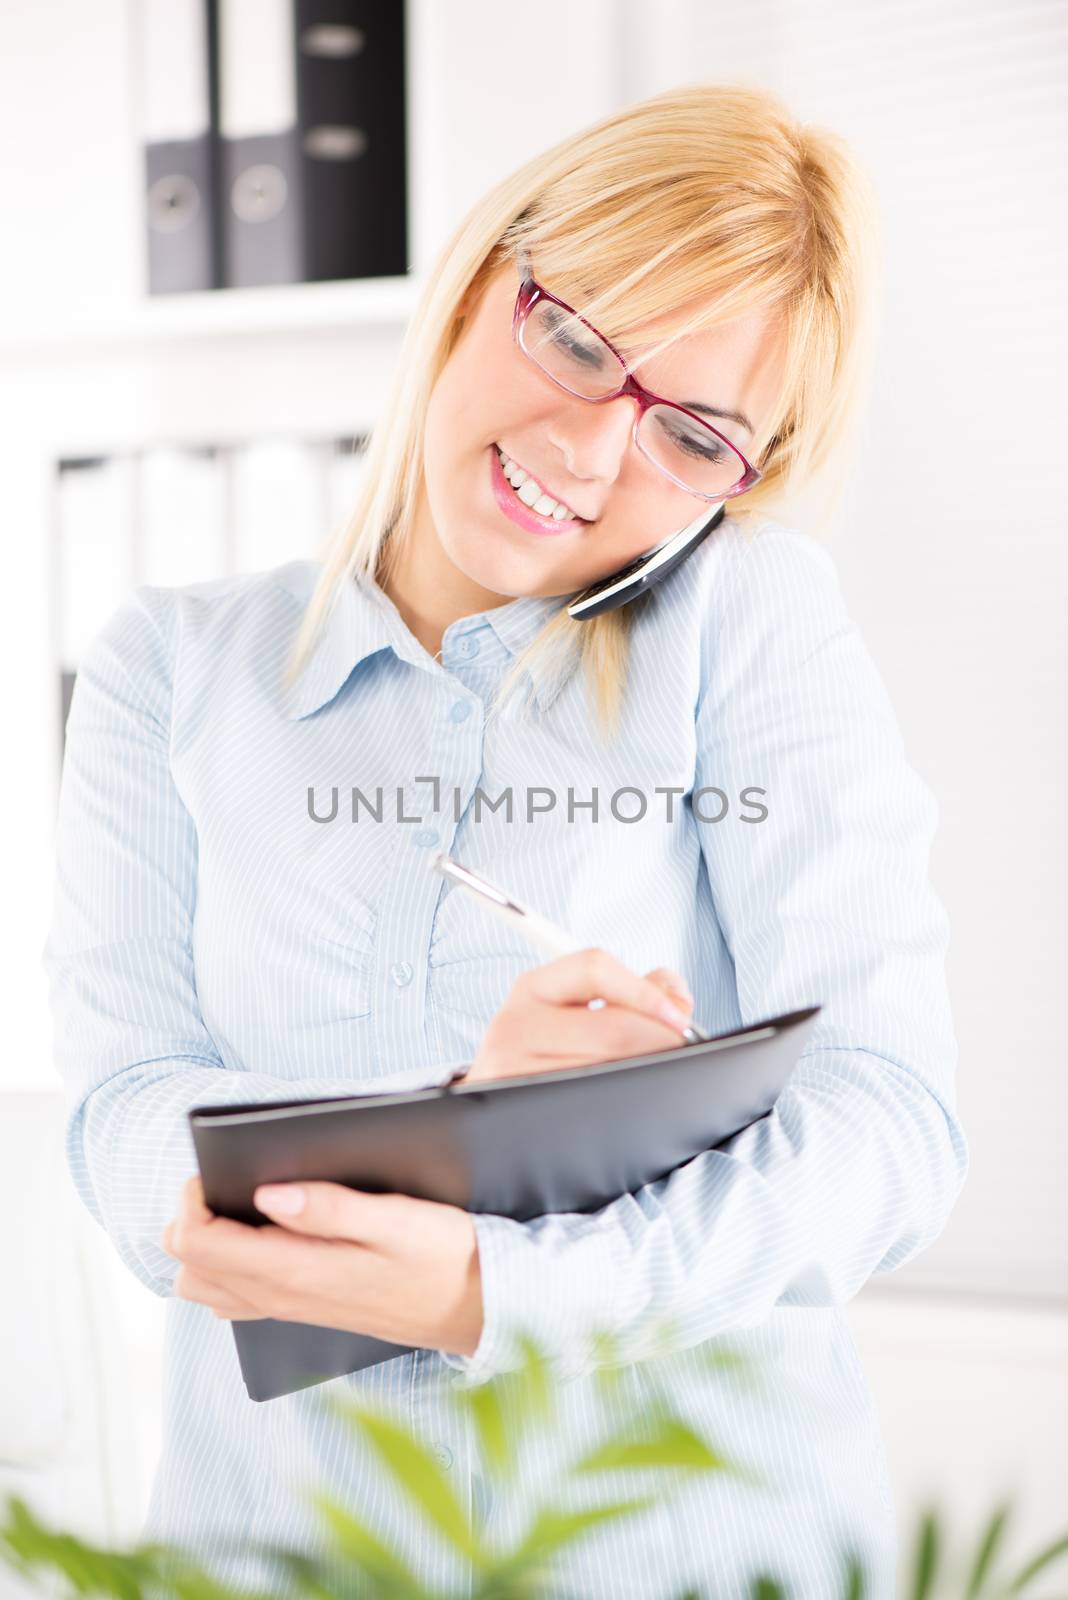 Busy Beautiful Businesswoman with glasses use mobile phone in the office.